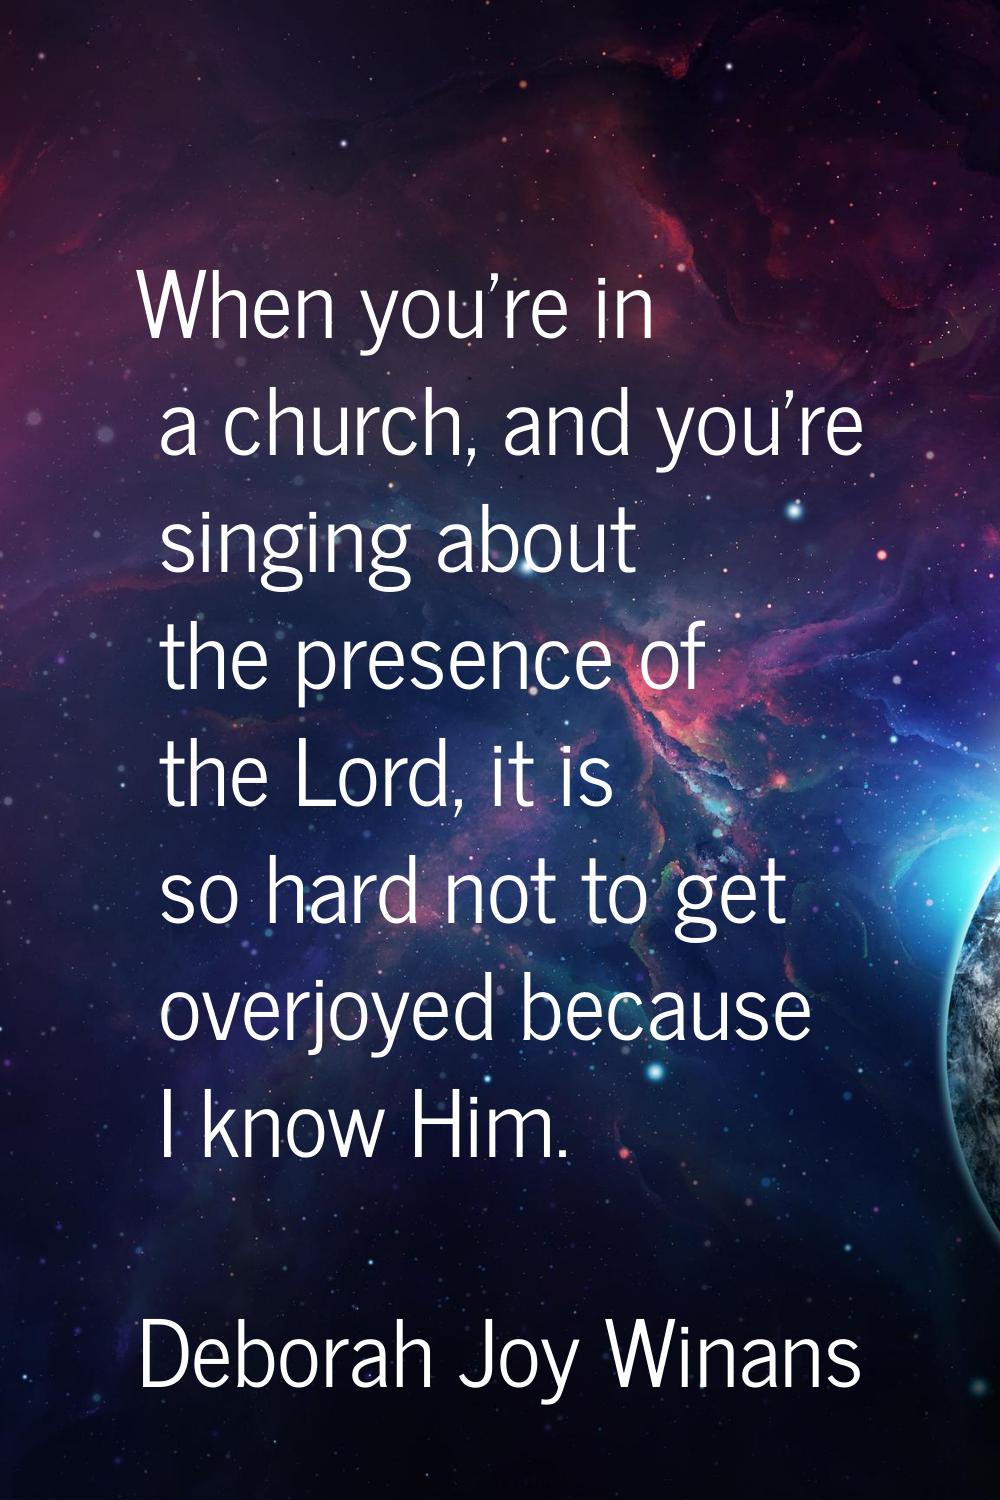 When you're in a church, and you're singing about the presence of the Lord, it is so hard not to ge